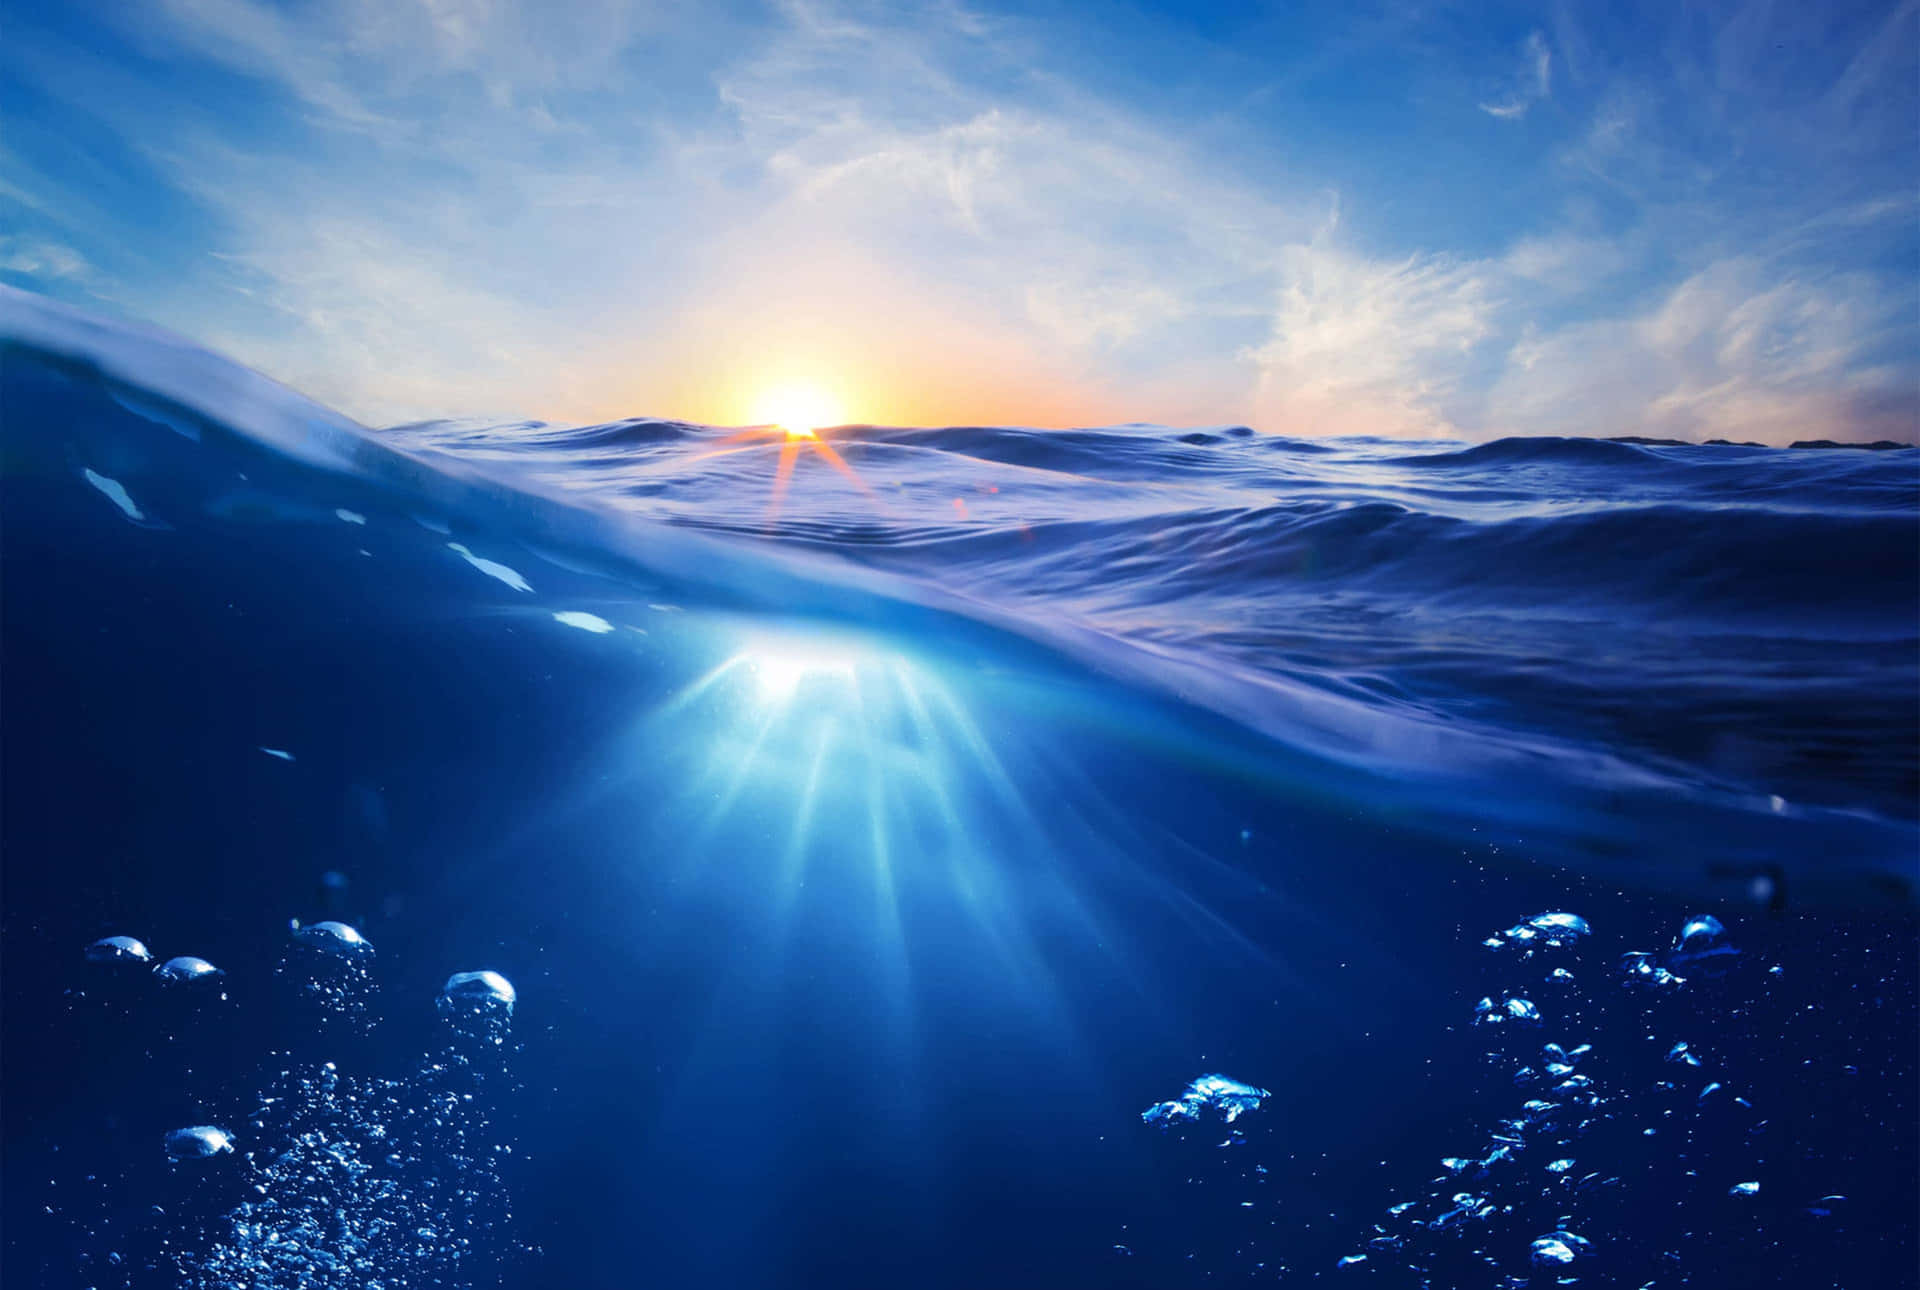 Underwater Ocean With Sun Rising Over The Water Background